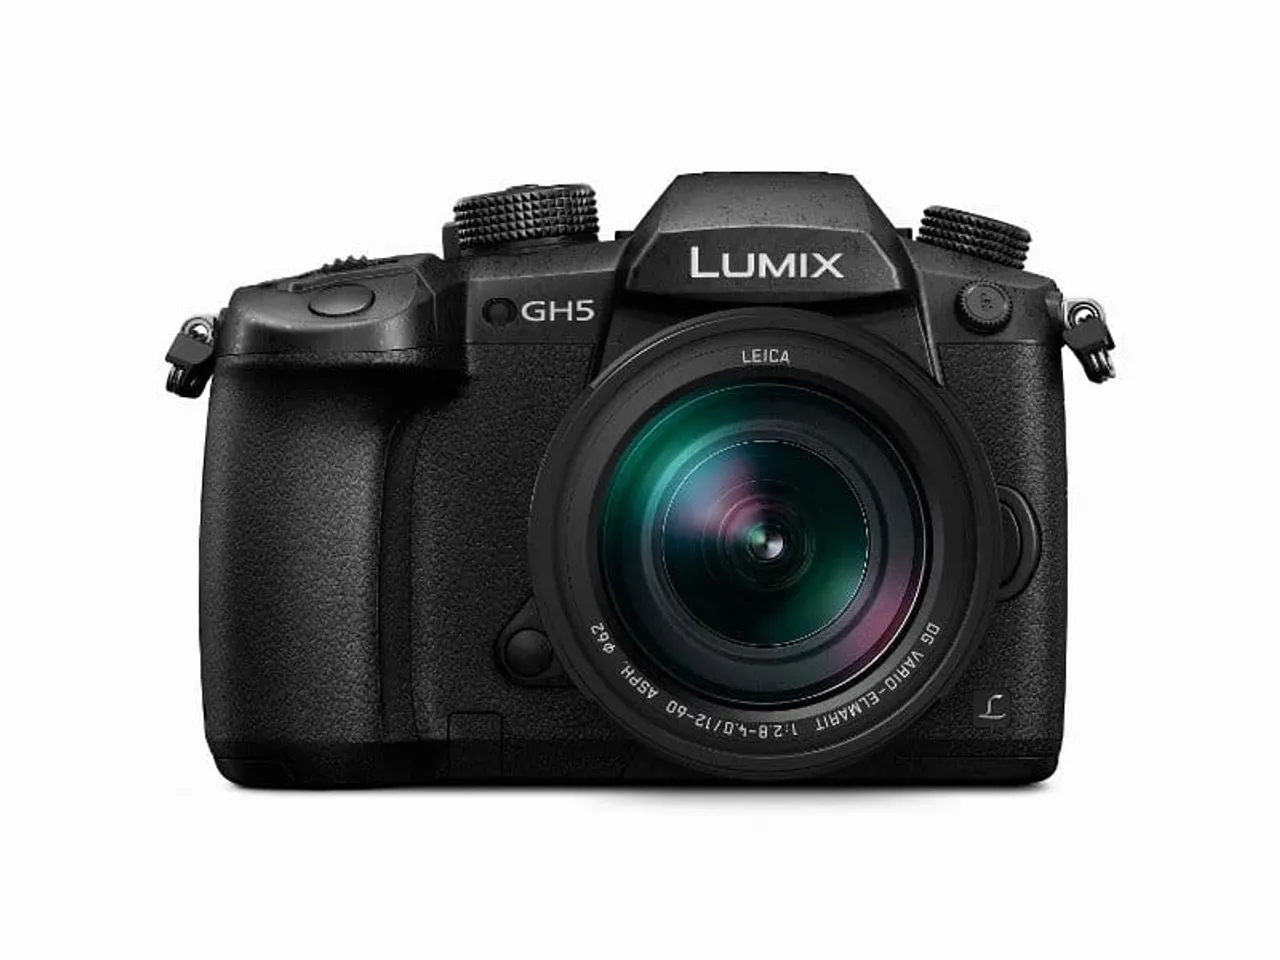 Panasonic Lumix GH5, That Can Take 6K photos at 30 fps and 4k Videos at 60p, Launched for Rs 1,88,990